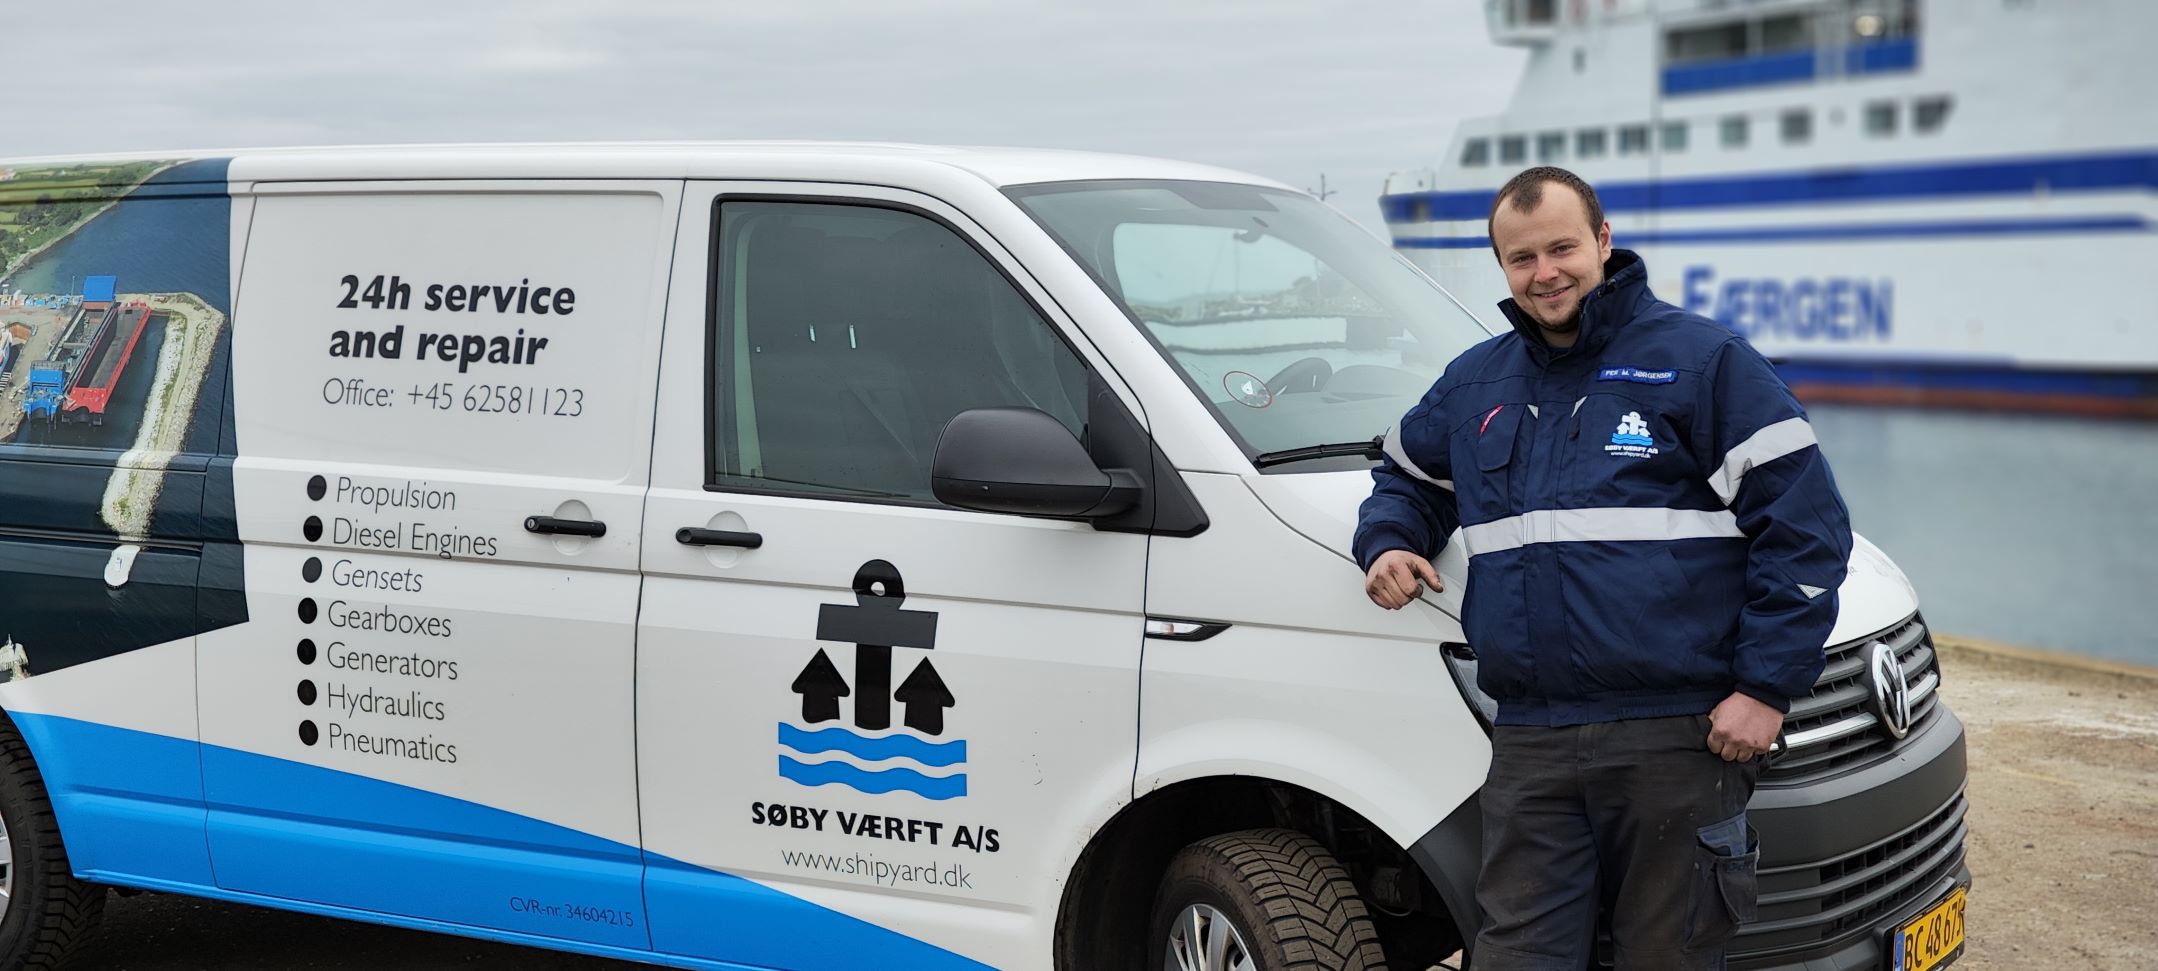 A man in front of the Søby Shipyard van